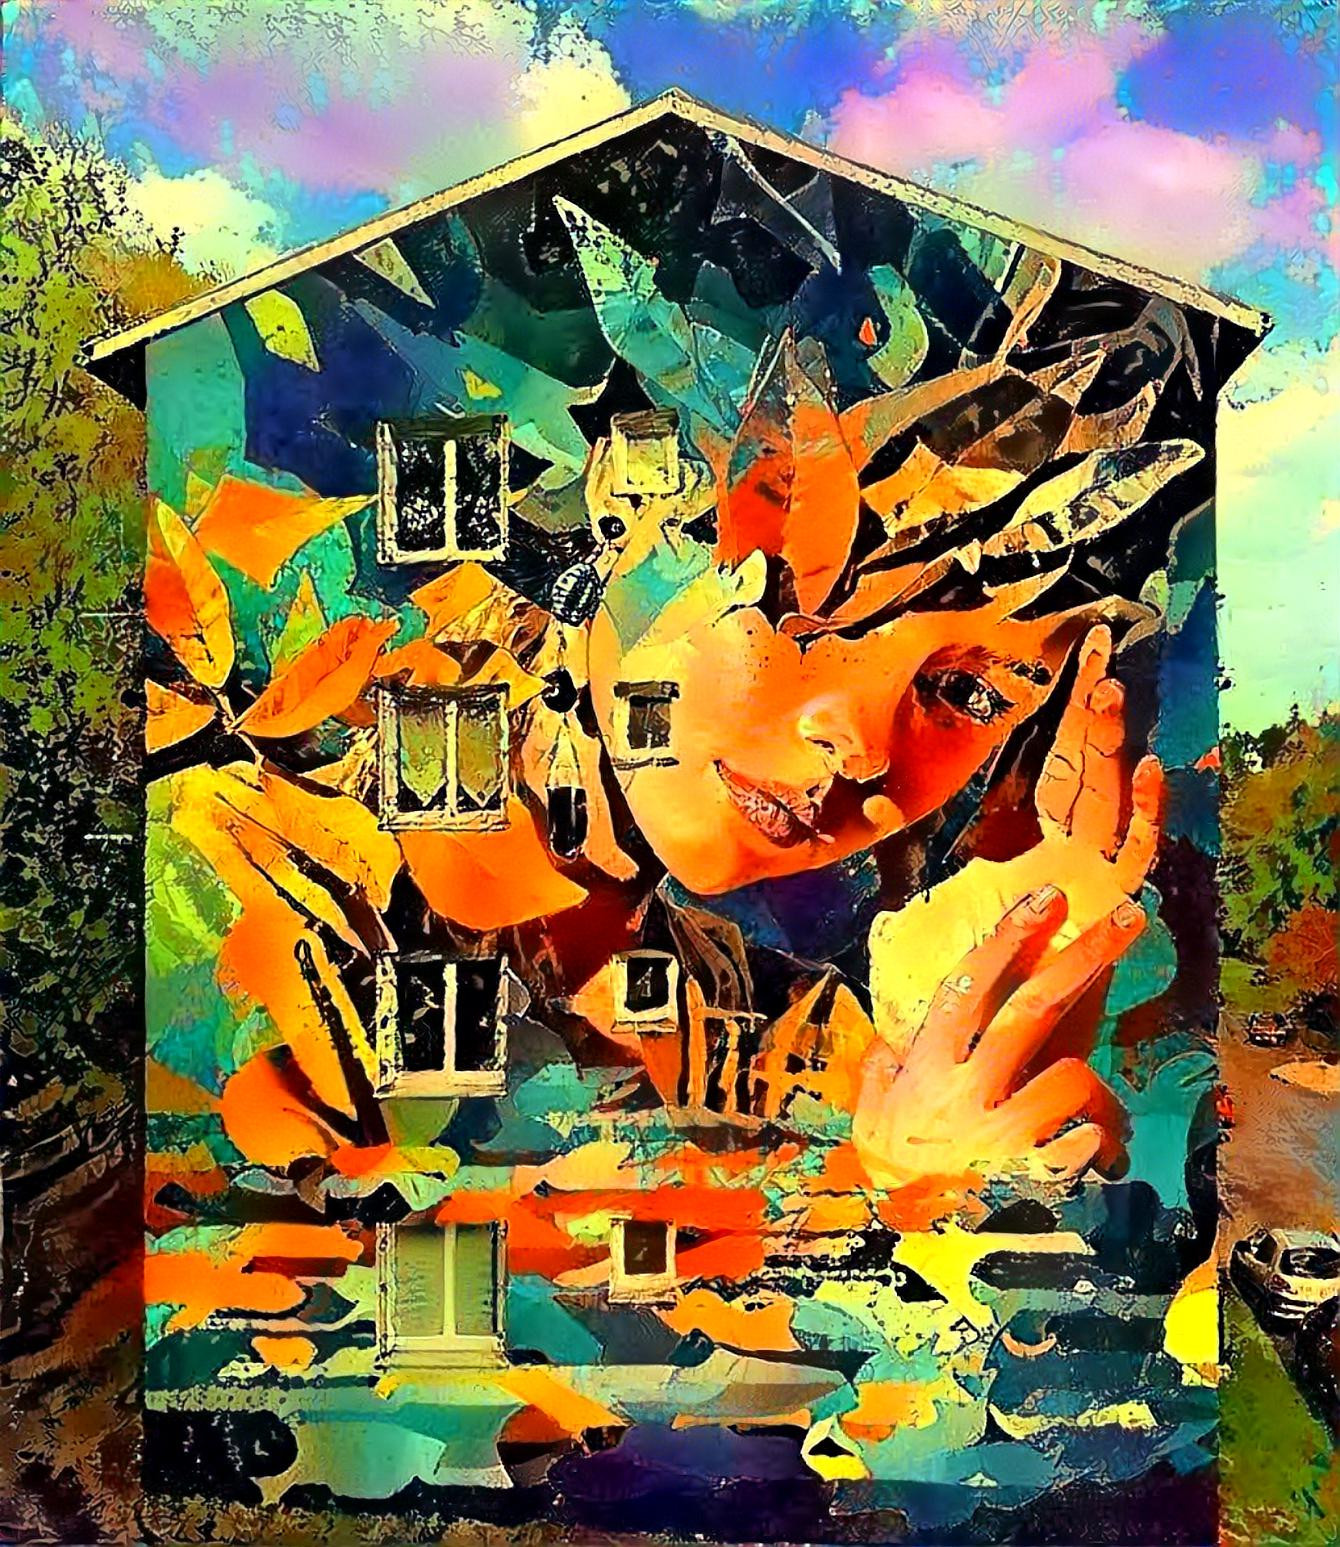 Welcome to the Deep Dream House